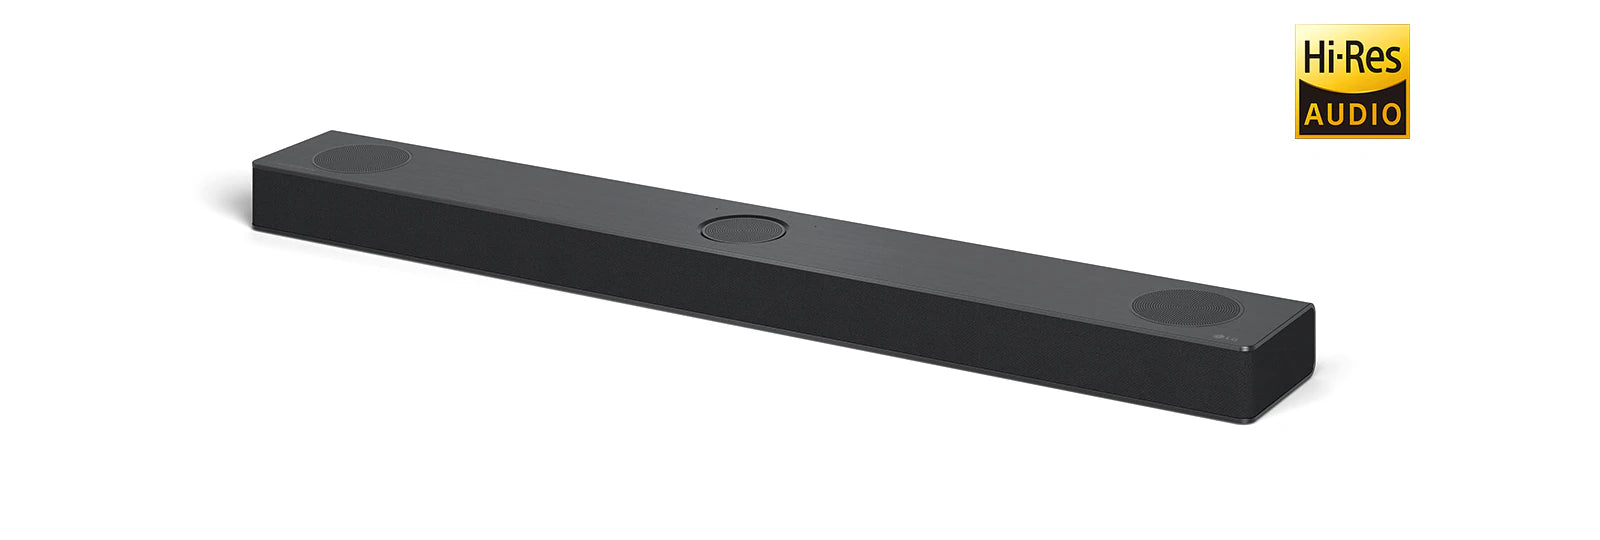 LG 5.1.3ch Wireless Sound Bar with Subwoofer and Rear Speakers - Dolby Atmos | S80QR.DGBRLLK